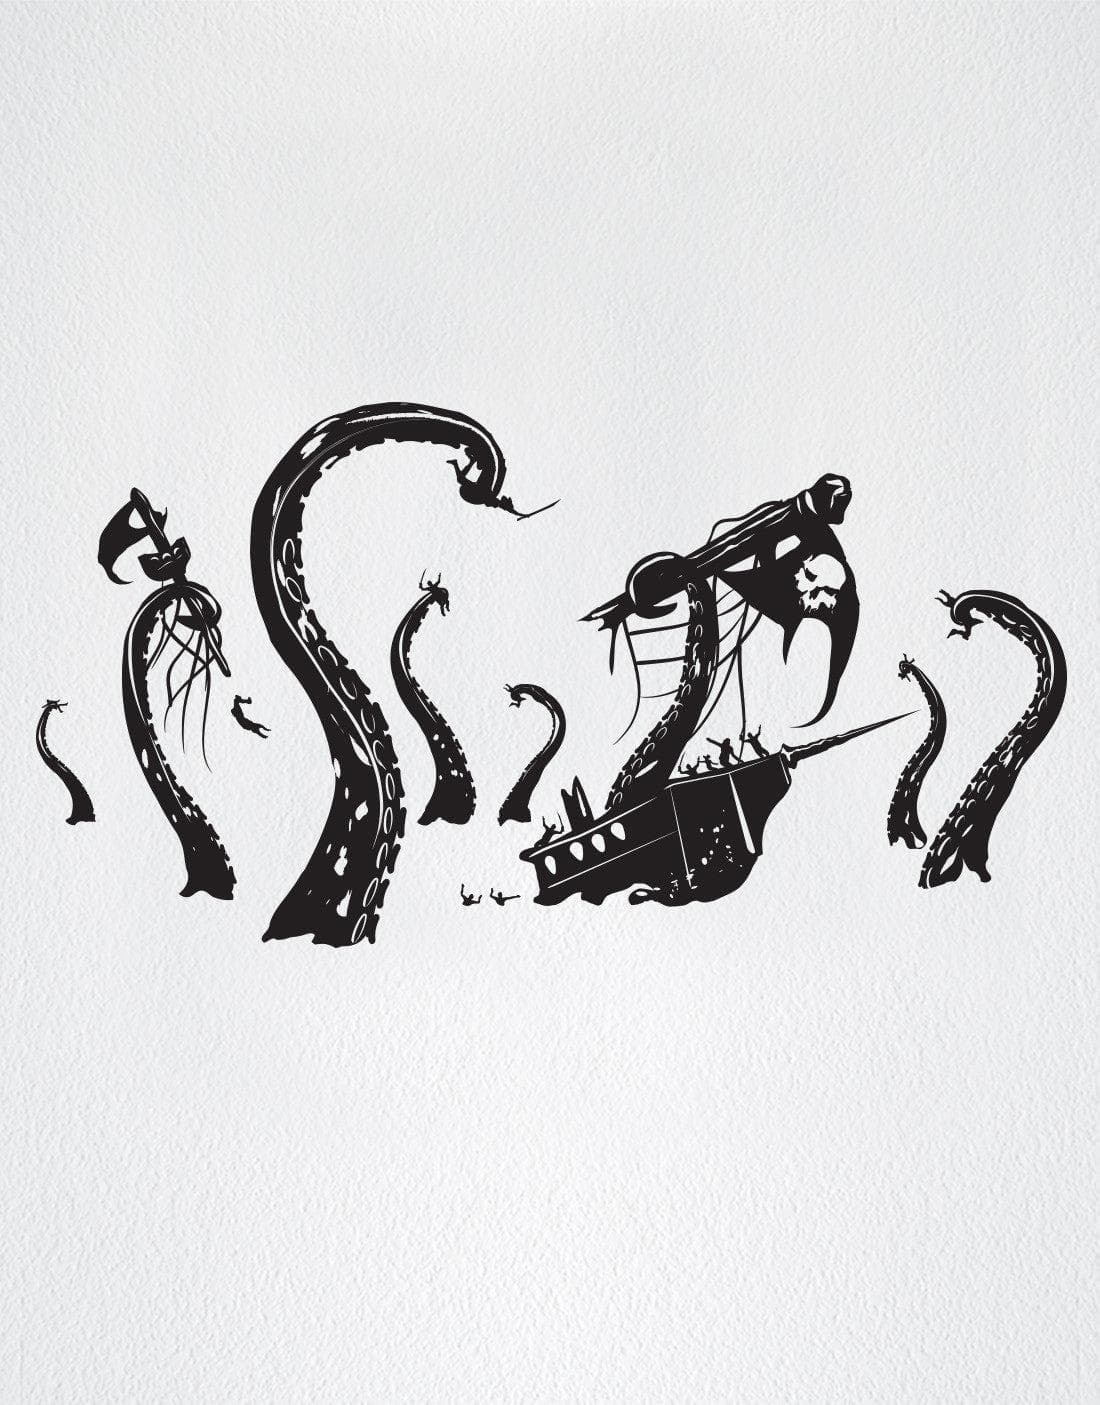 A black kraken and pirate ship decal on a white background.